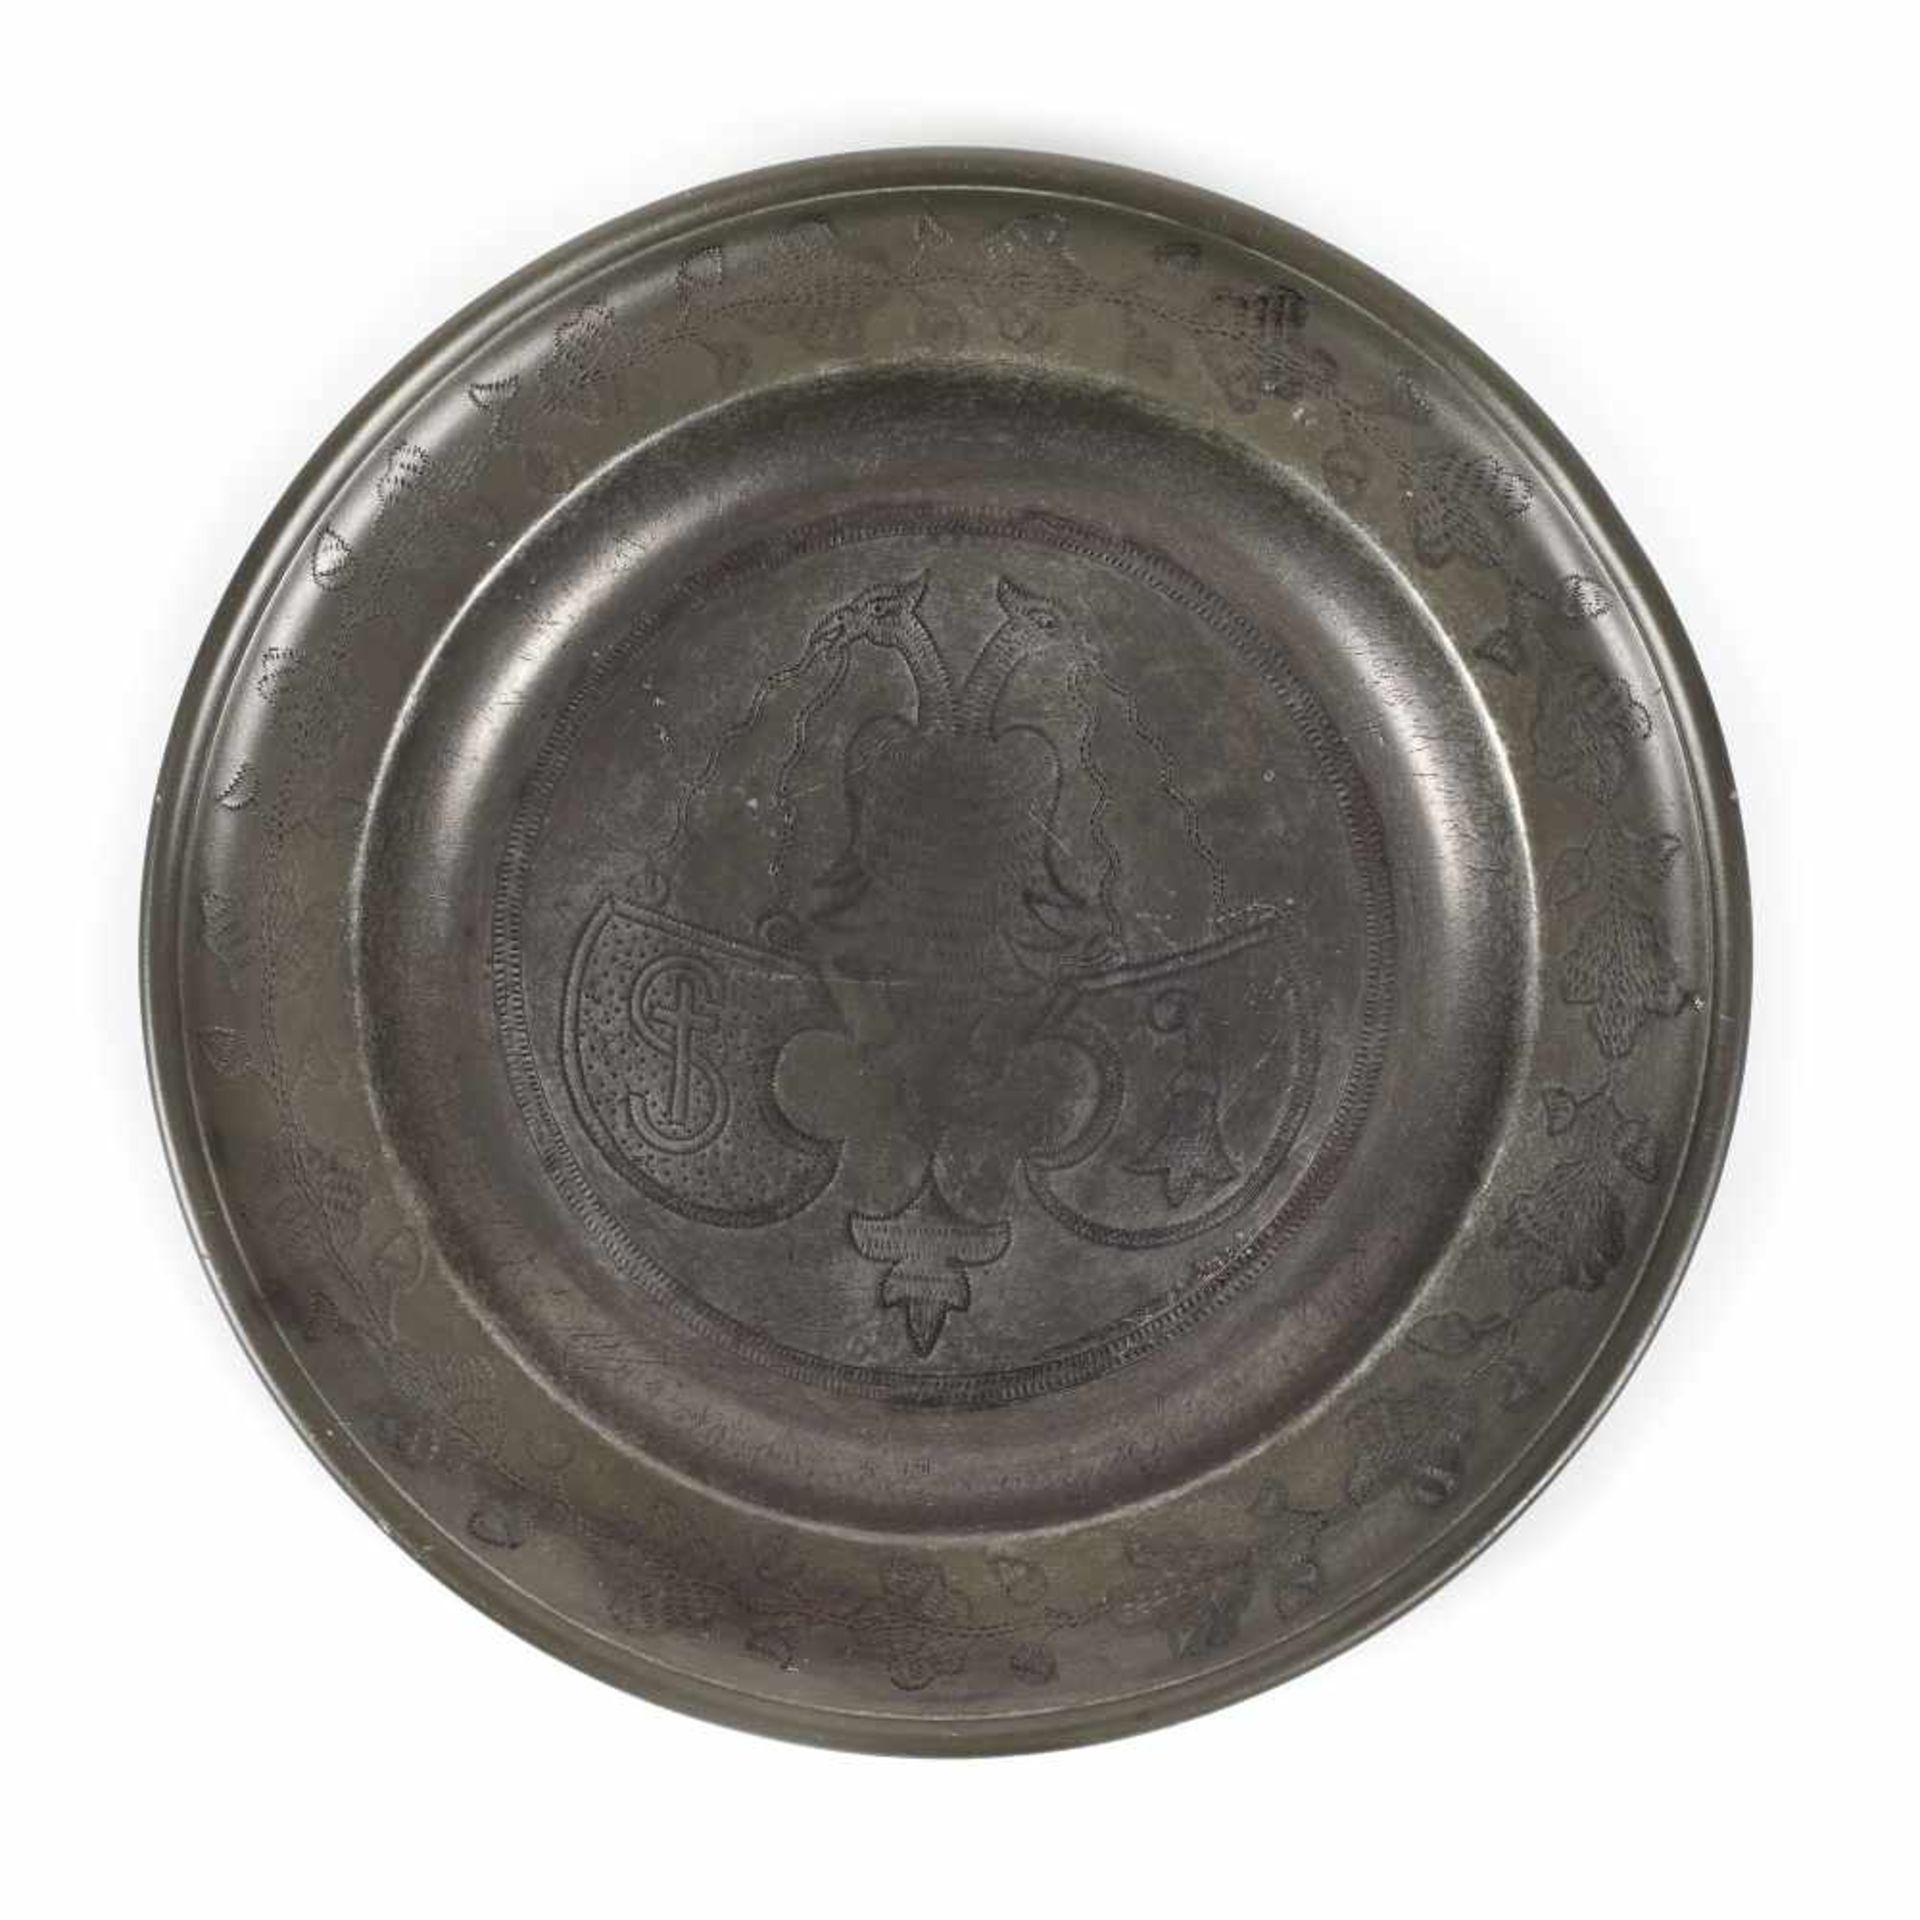 Tin plate, decorated with the bicephalous eagle, Transylvania, late 18th century - early 19th centur